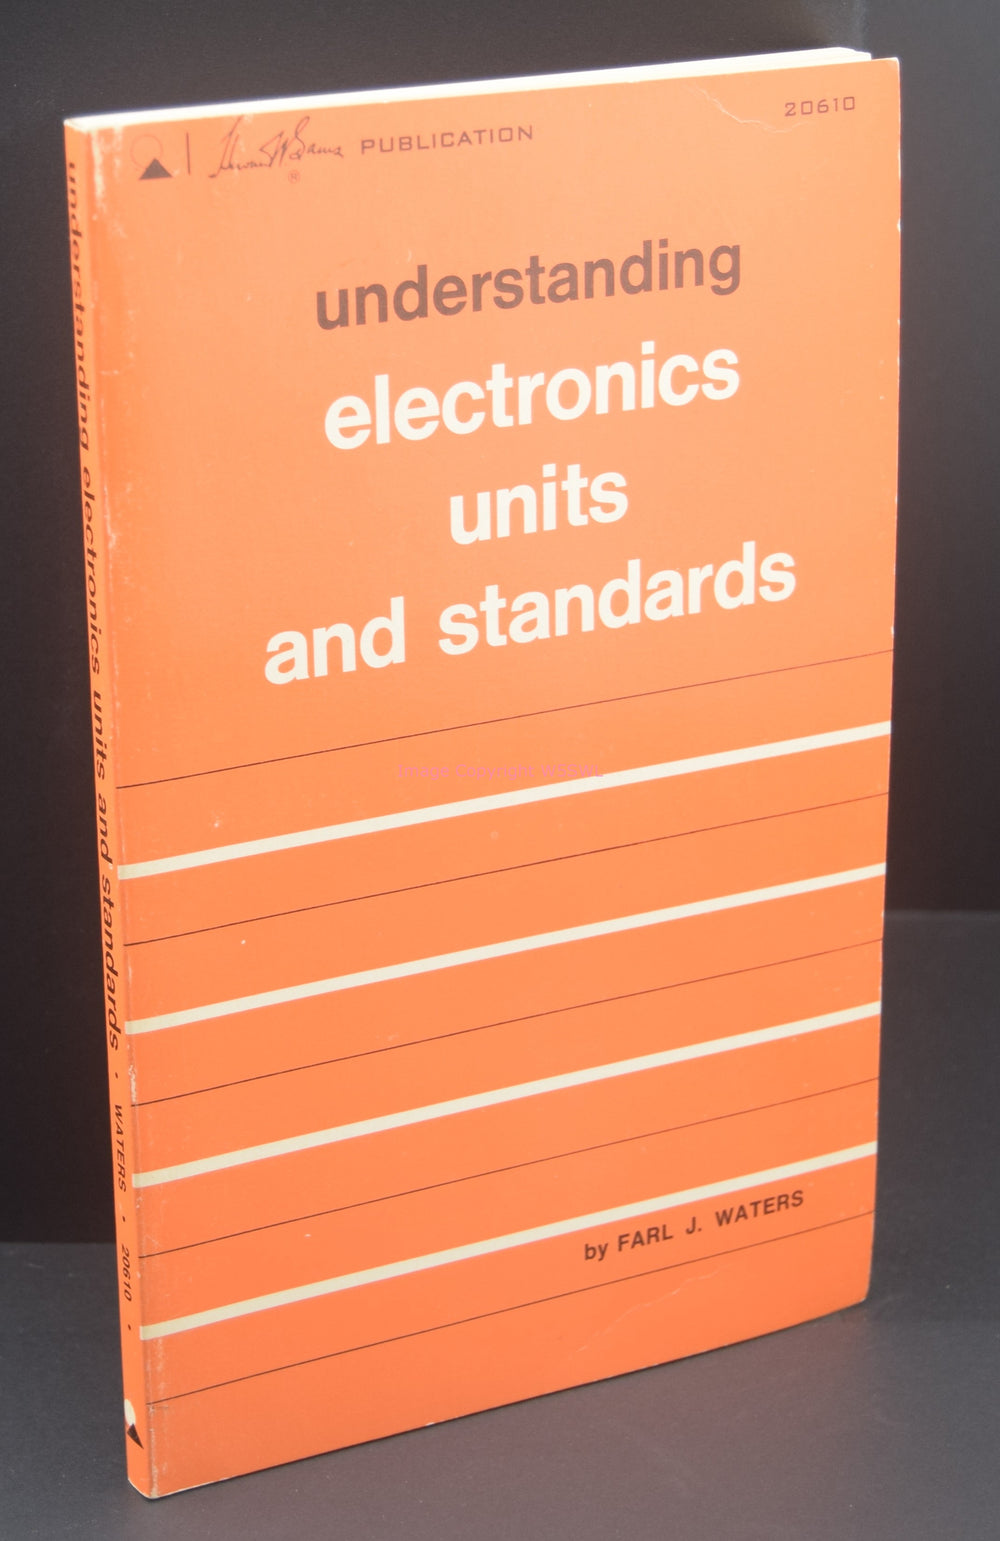 Understanding Electronics Units and Standards - Dave's Hobby Shop by W5SWL